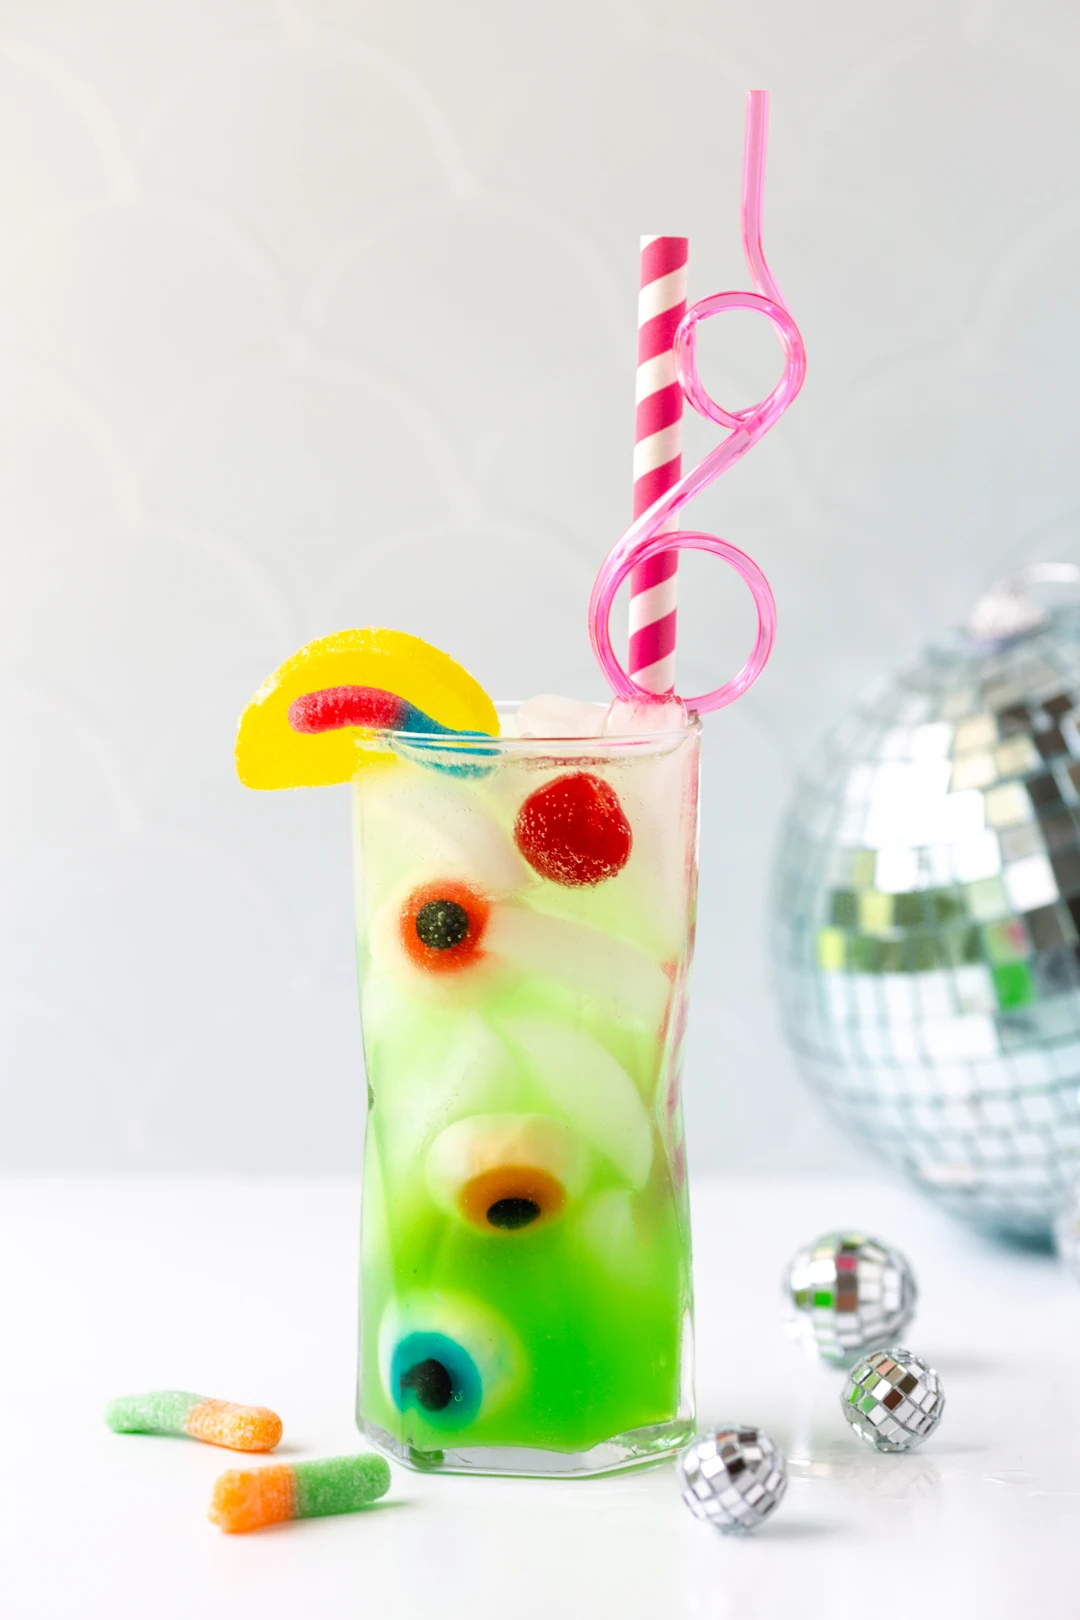 green tinted ghoul juice  inspired by monster high: the movie with fun pink straws, gummy eyeballs, gummy worms and candy lemon.